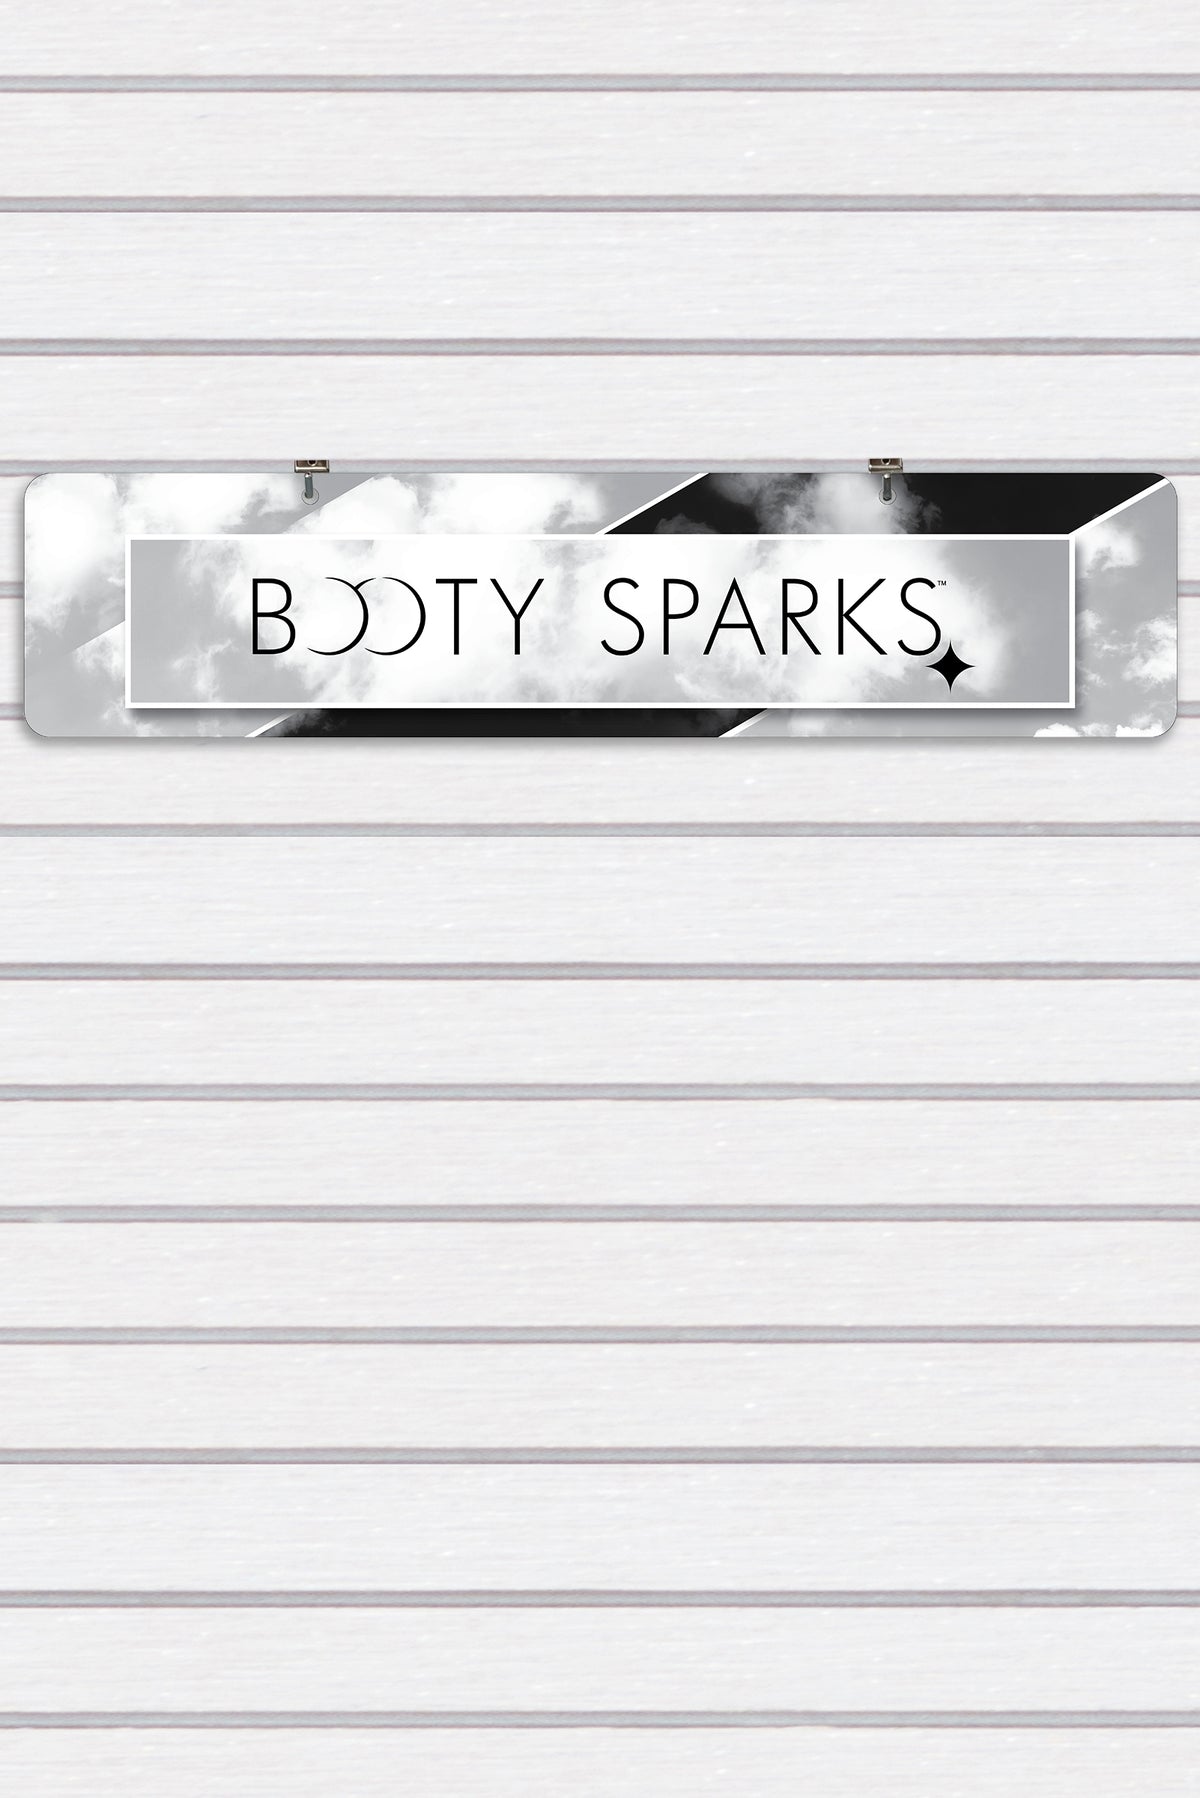 Booty Sparks Display Sign